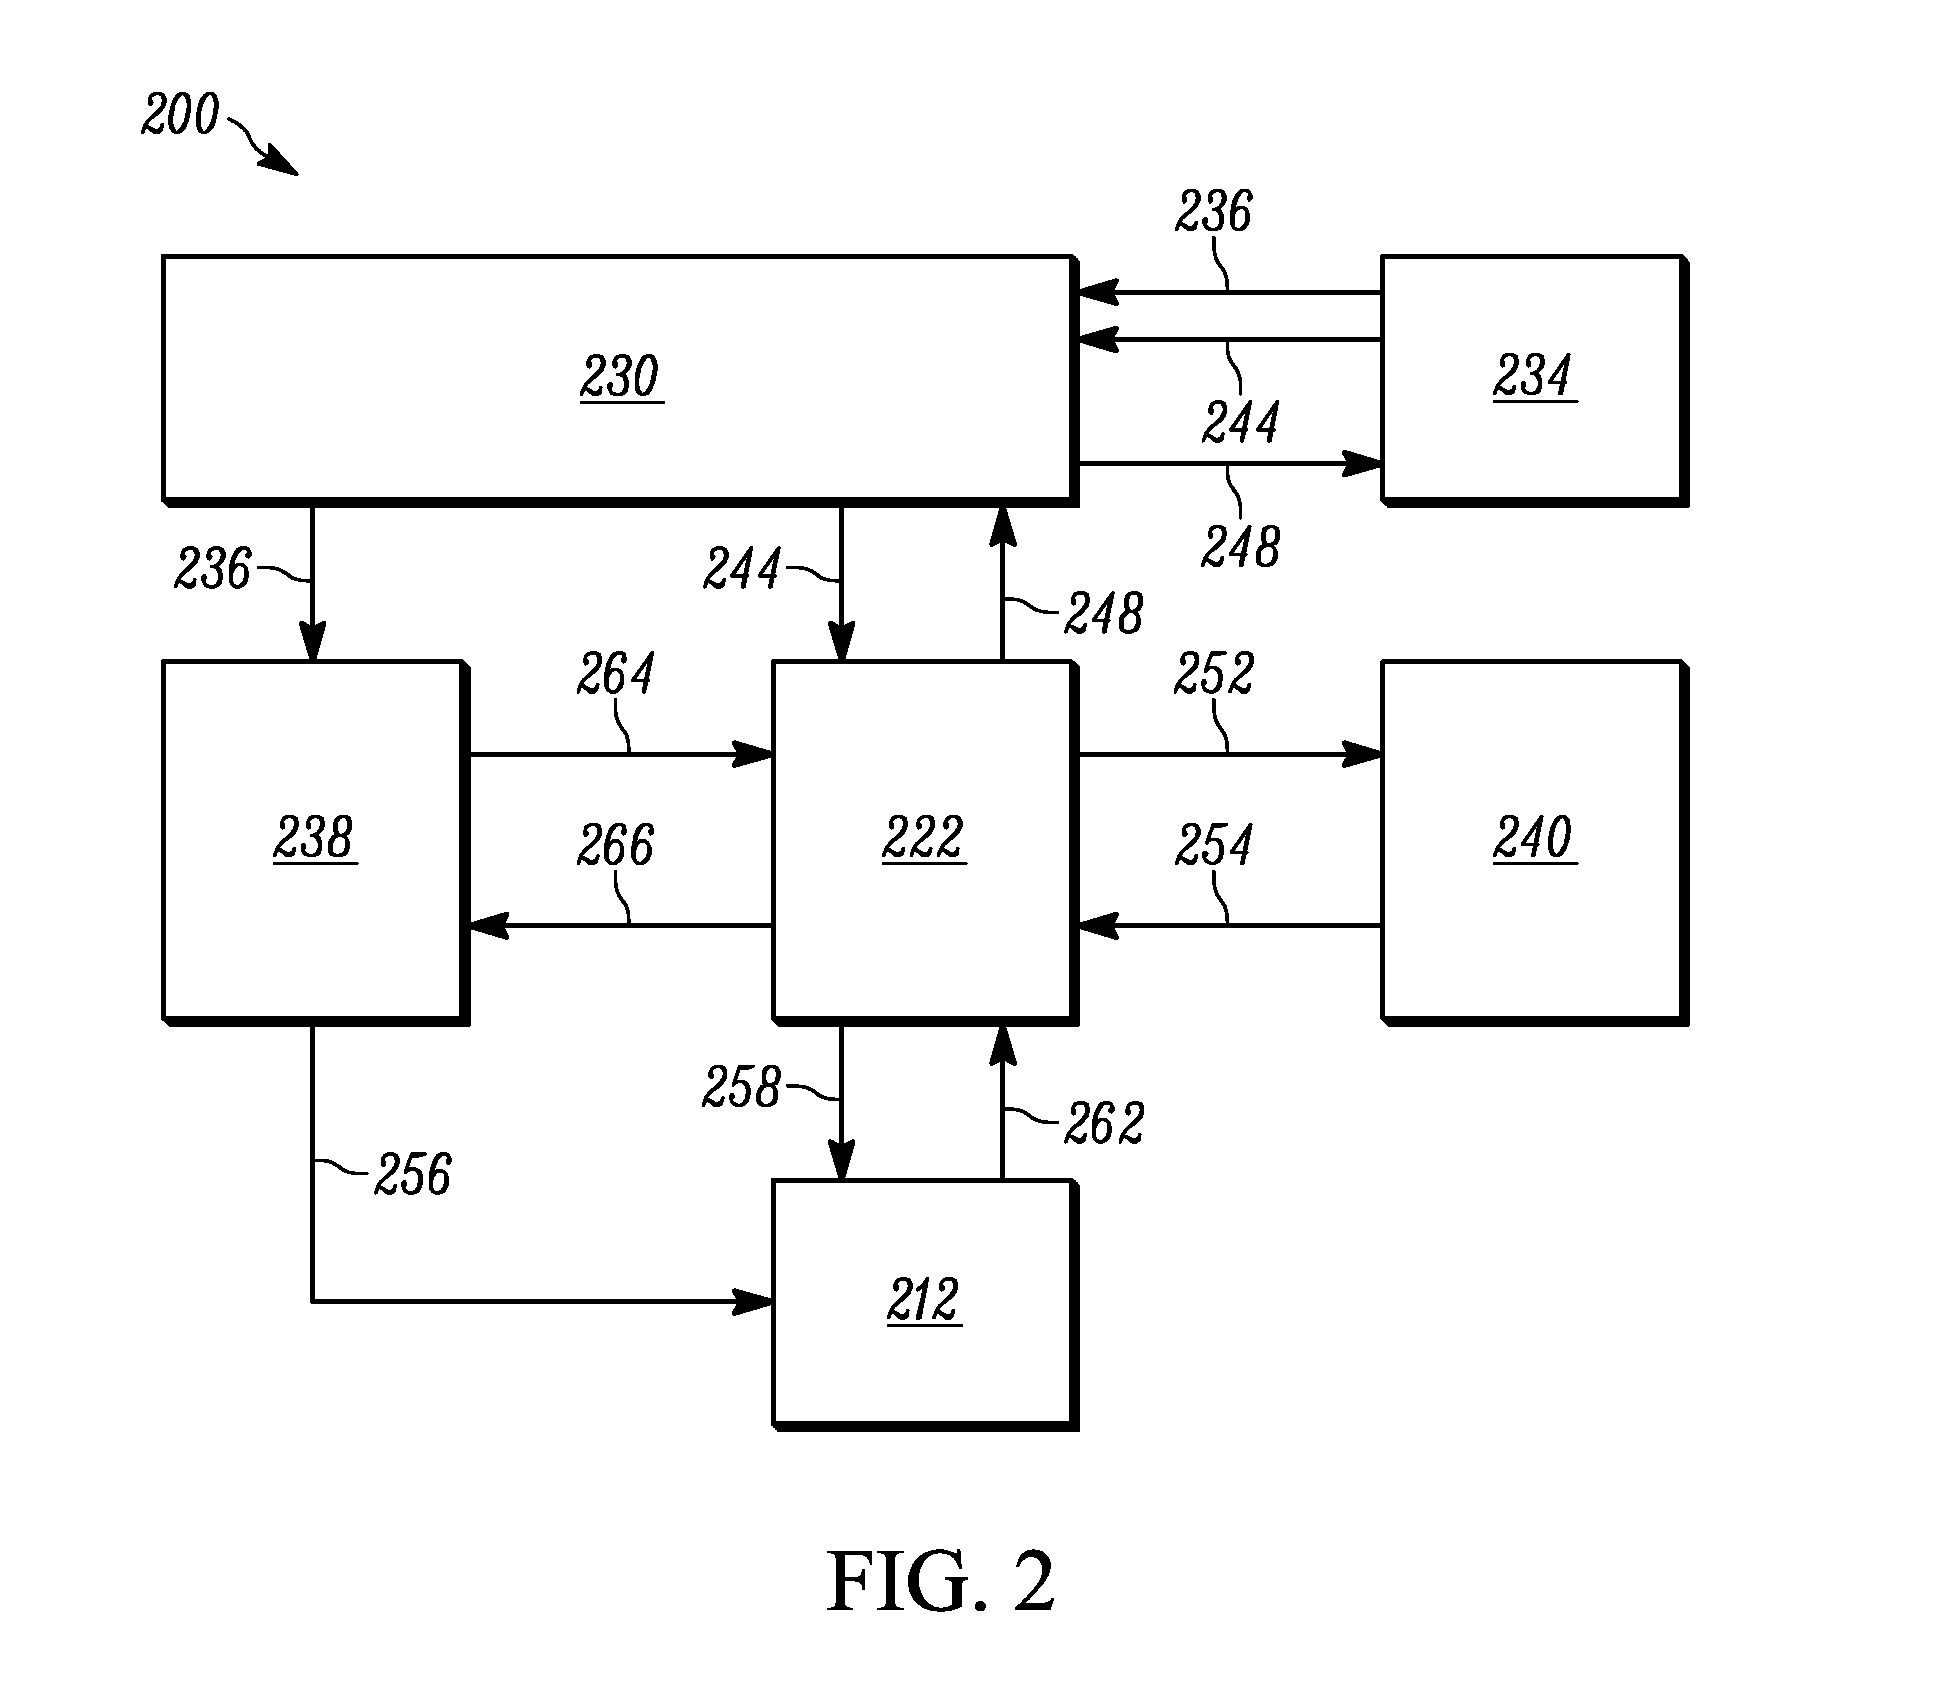 Mass Spectrometry Method And Apparatus For Clinical Diagnostic Applications